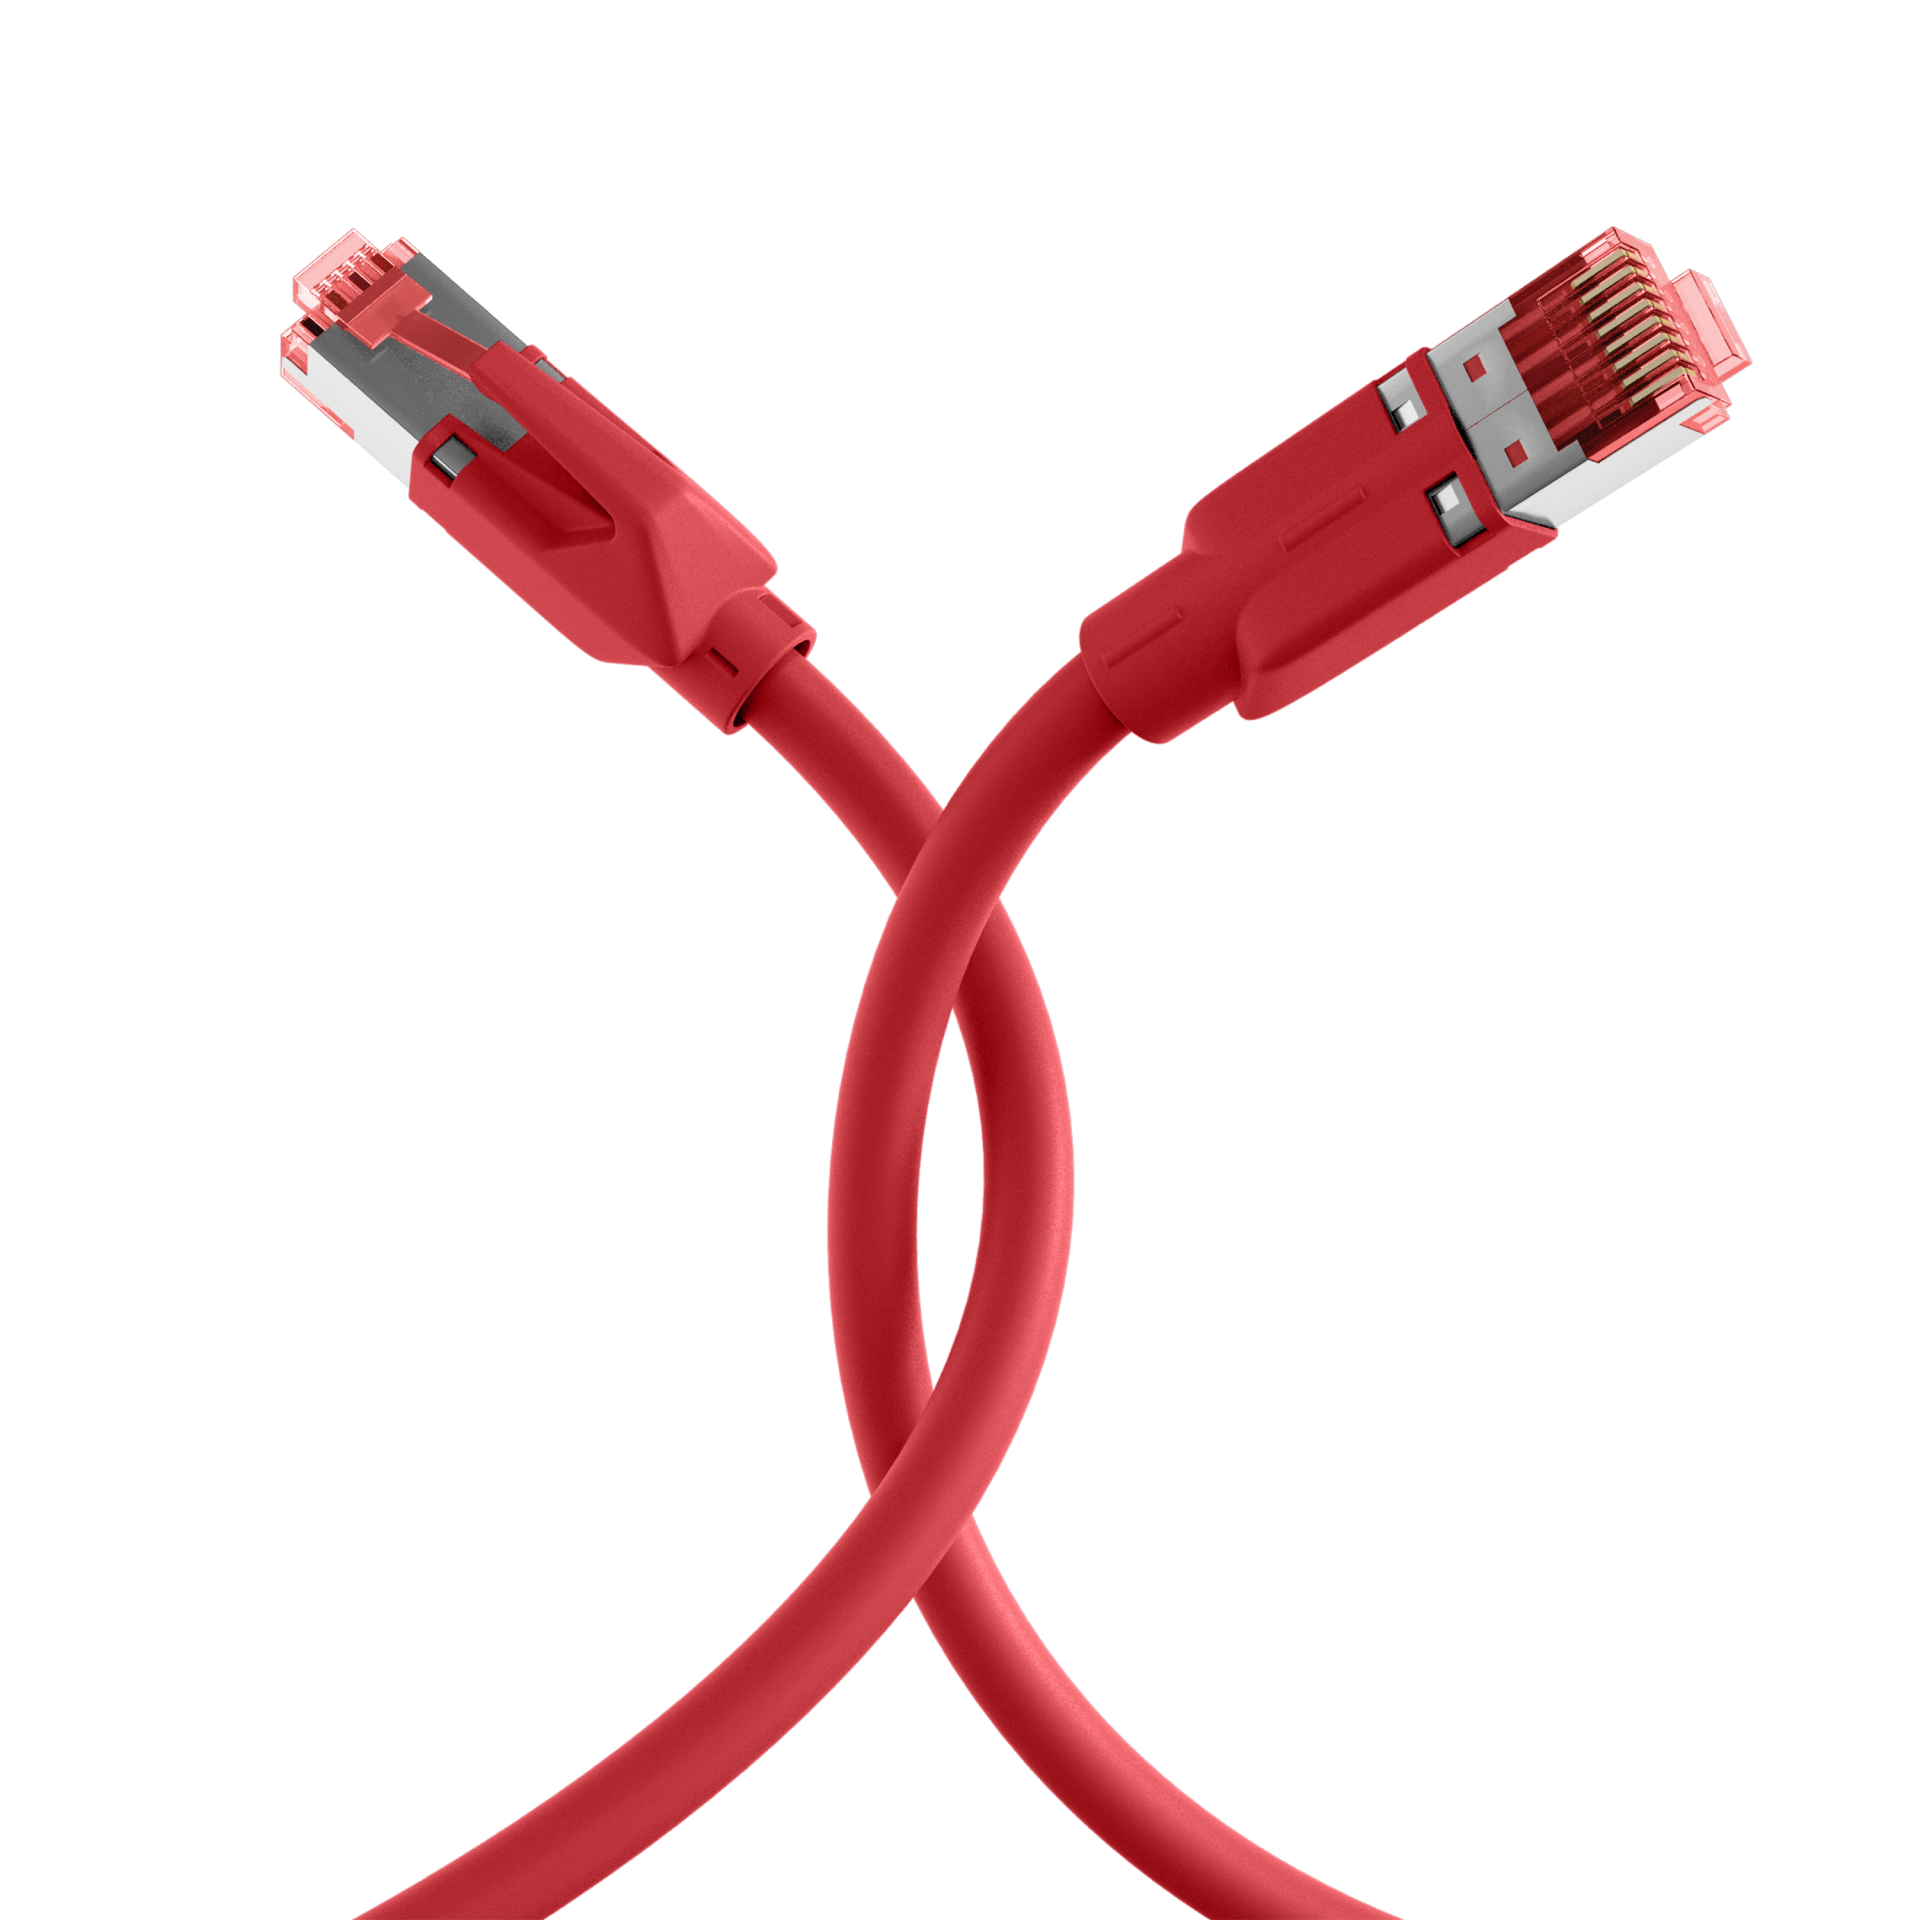 RJ45 Patch Cord Cat.6A S/FTP Dätwyler 7702 TM21 red 2m